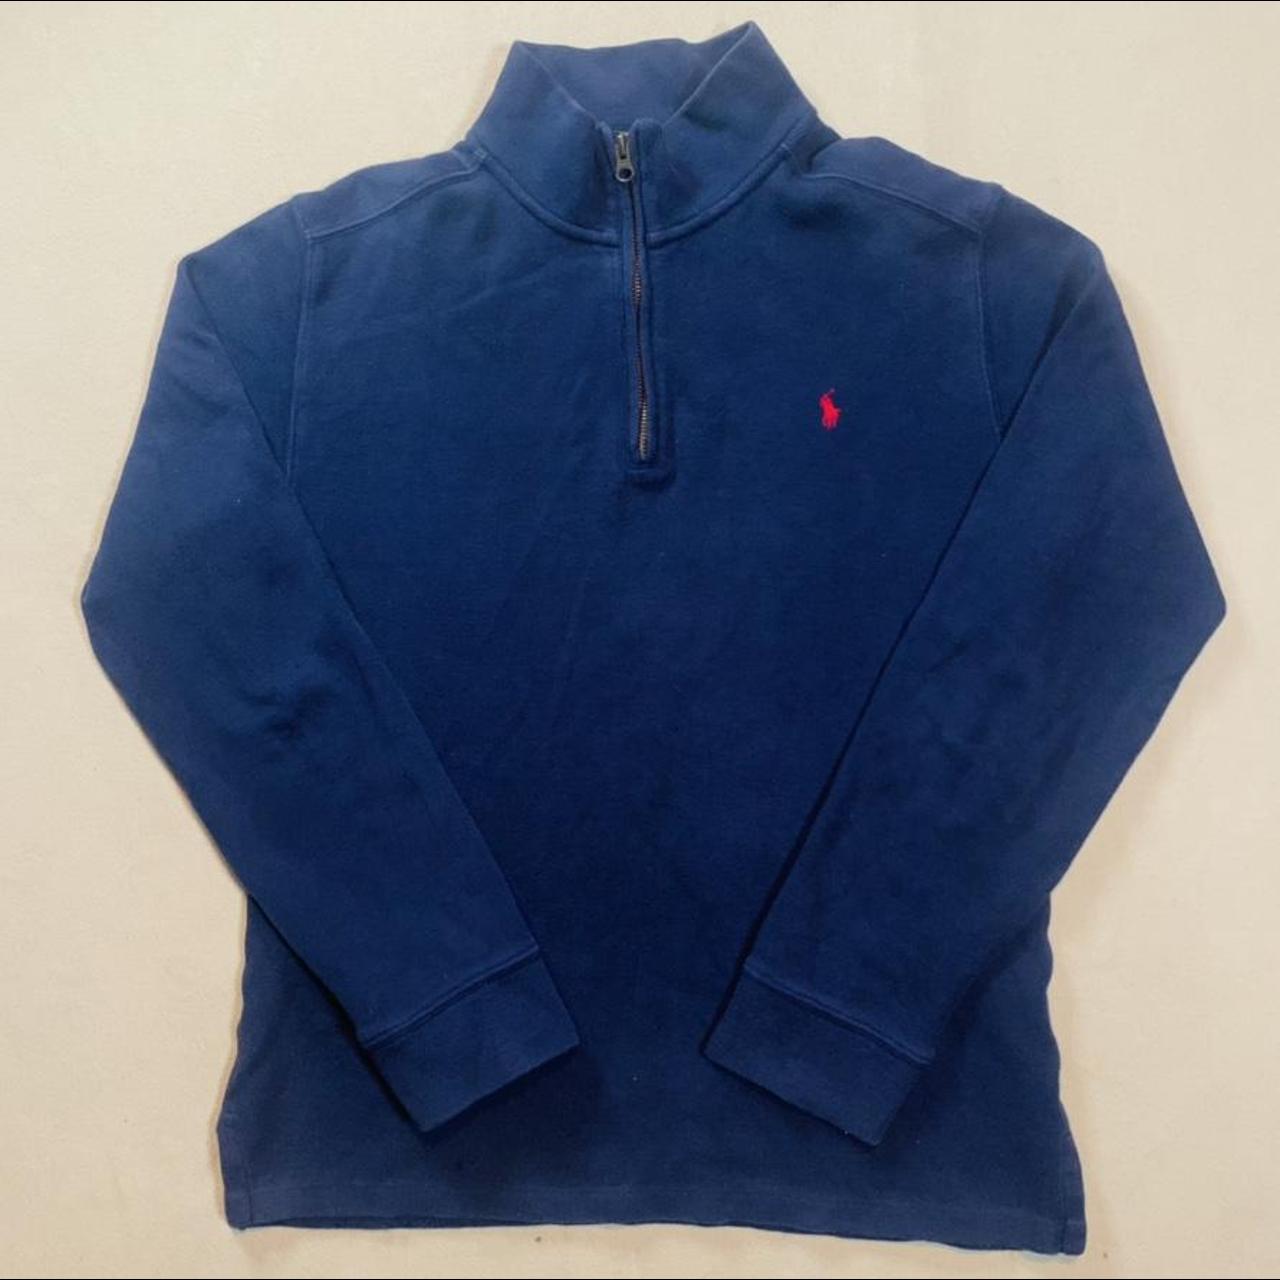 Polo Ralph Lauren sweater in supreme condition. This... - Depop